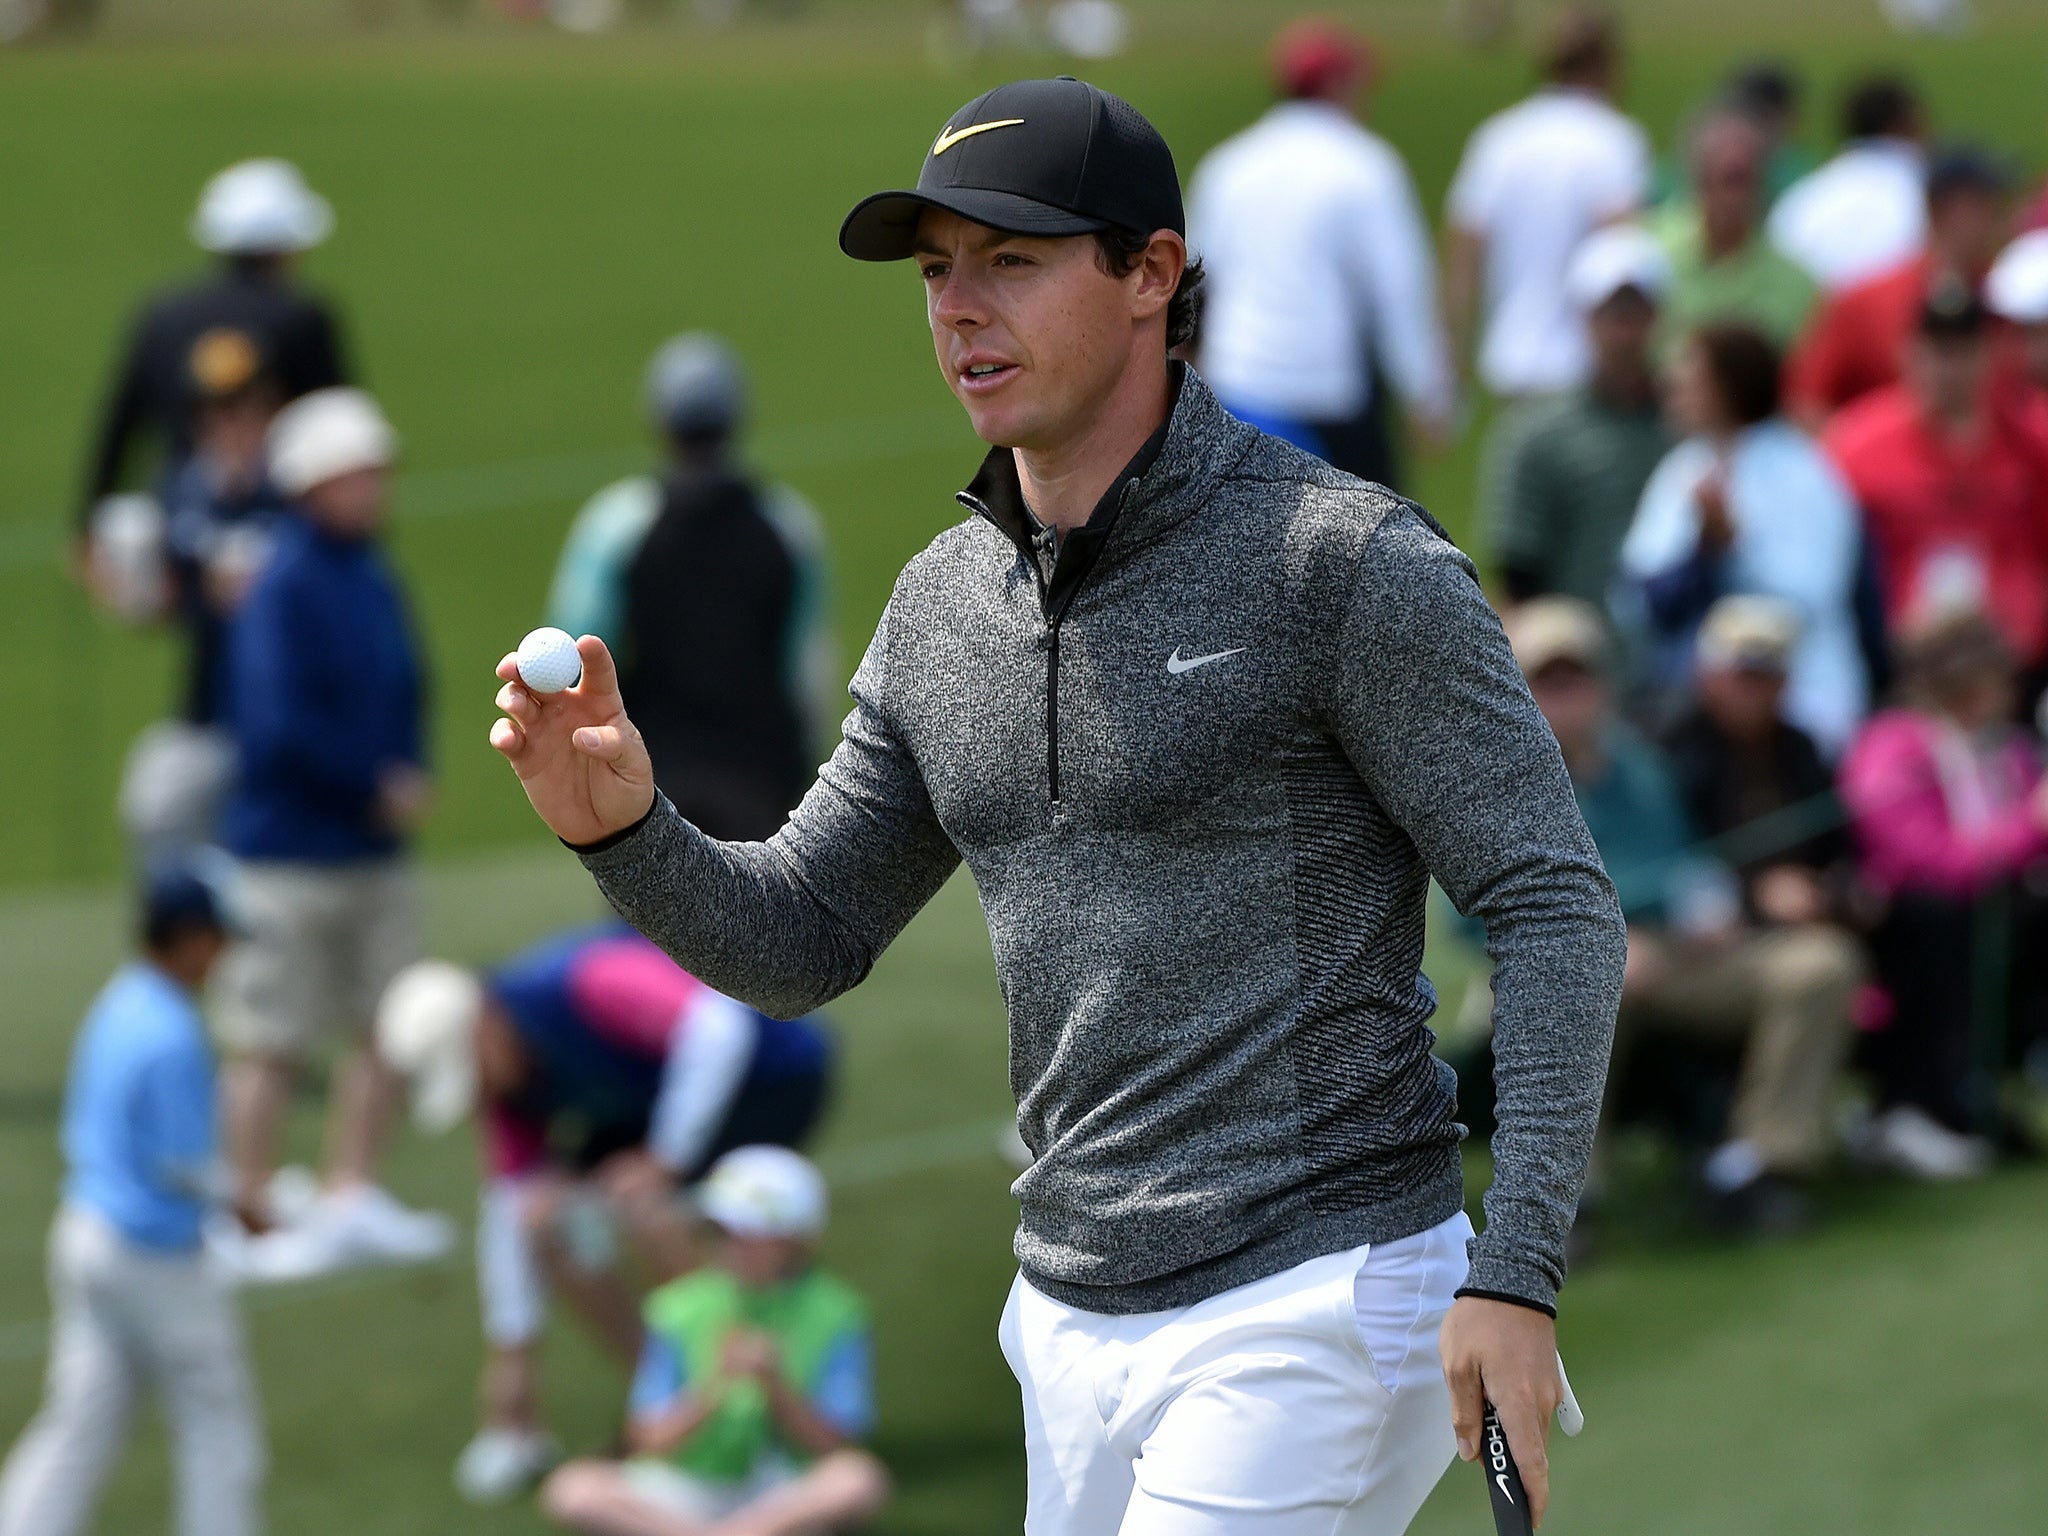 Rory McIlroy puts on the 2nd green at Augusta